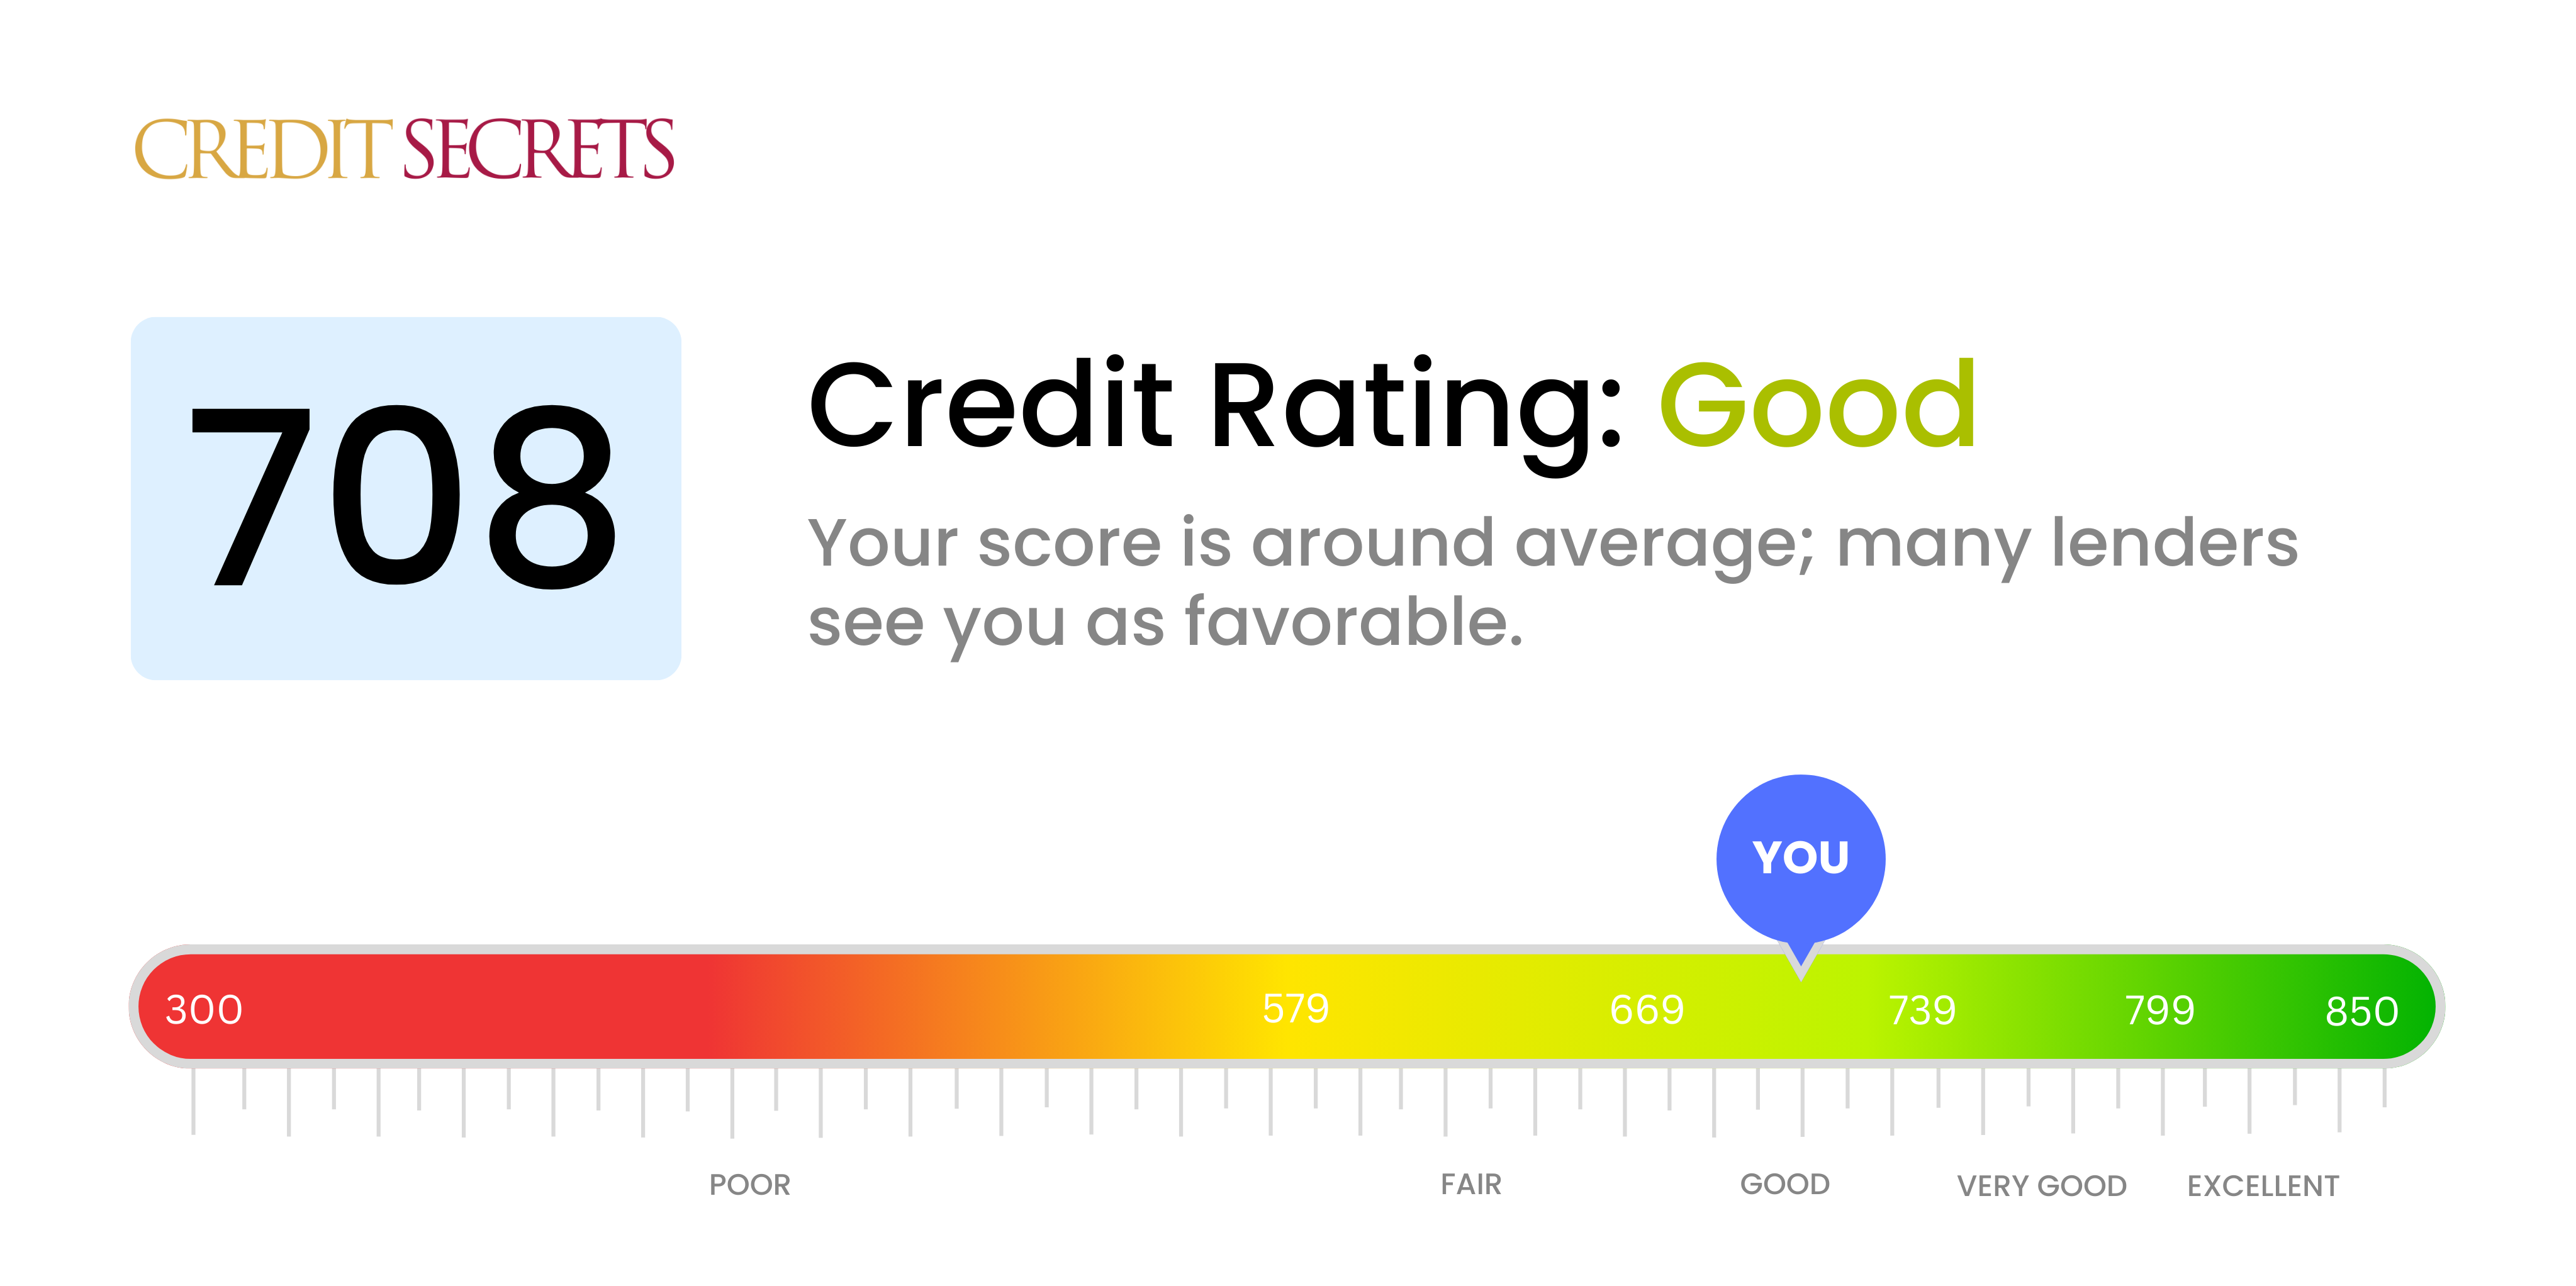 Is 708 a good credit score?